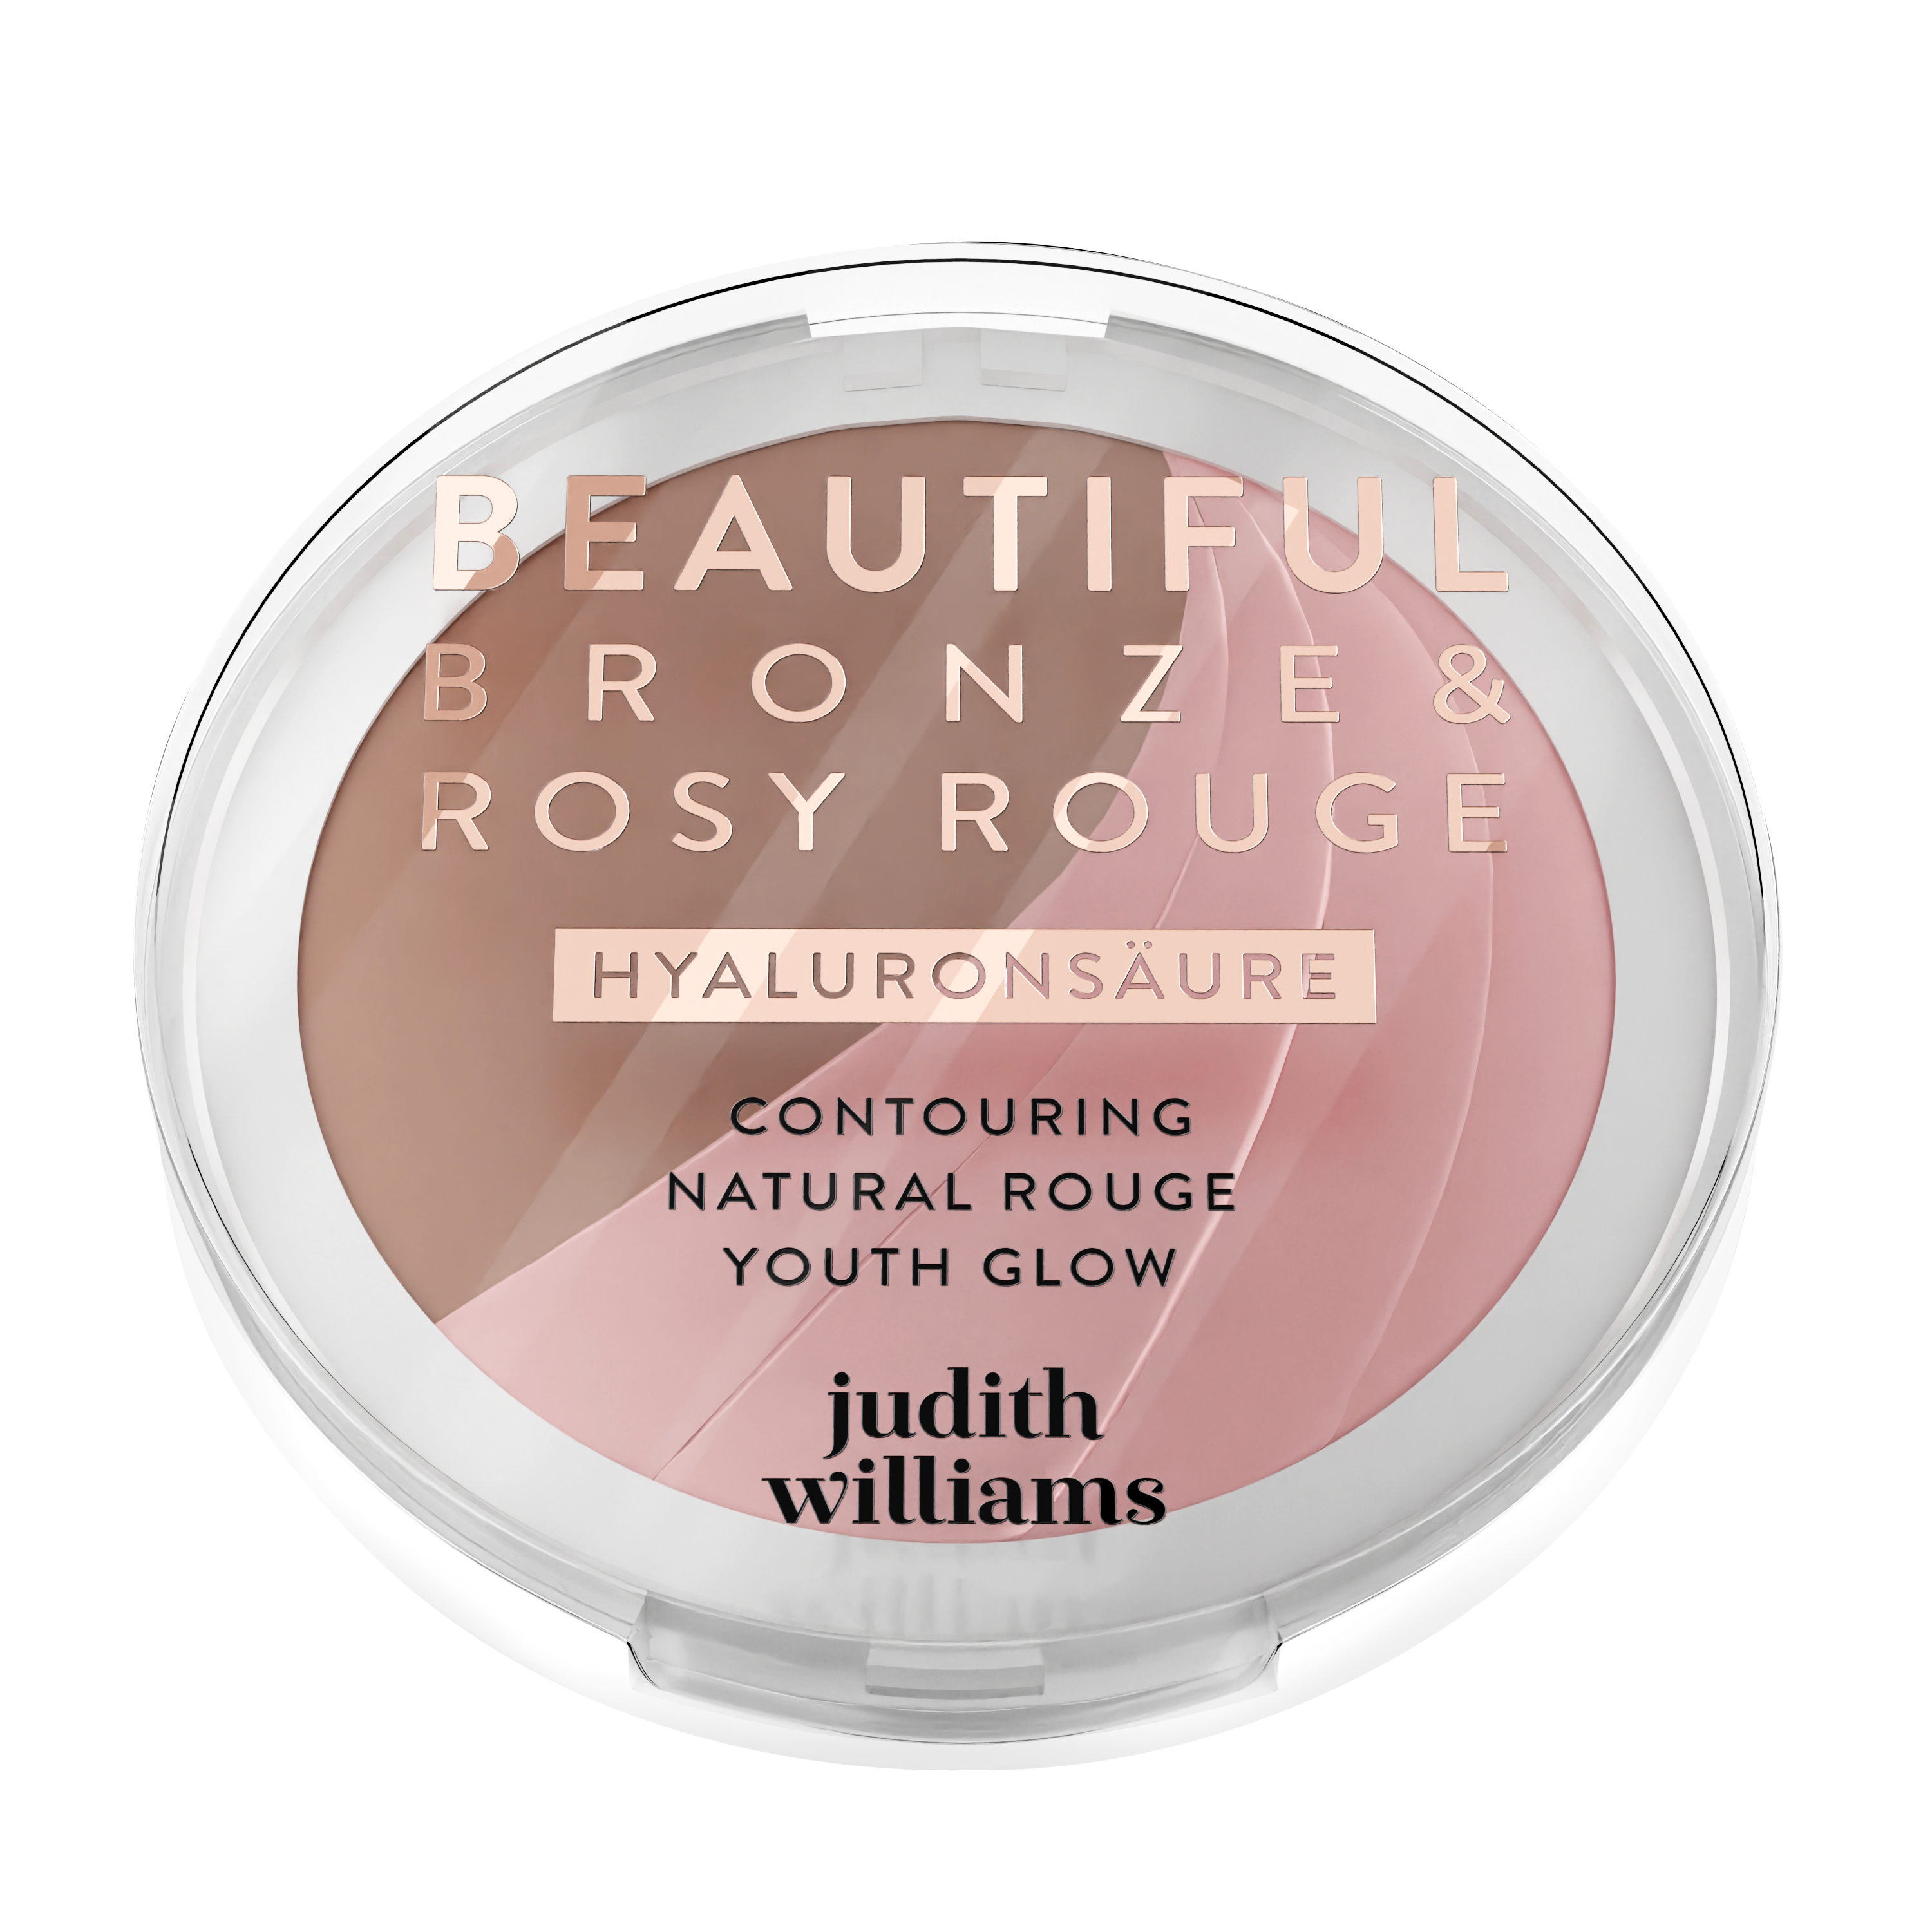 Make-up Beautiful Bronze & Rosy Rouge